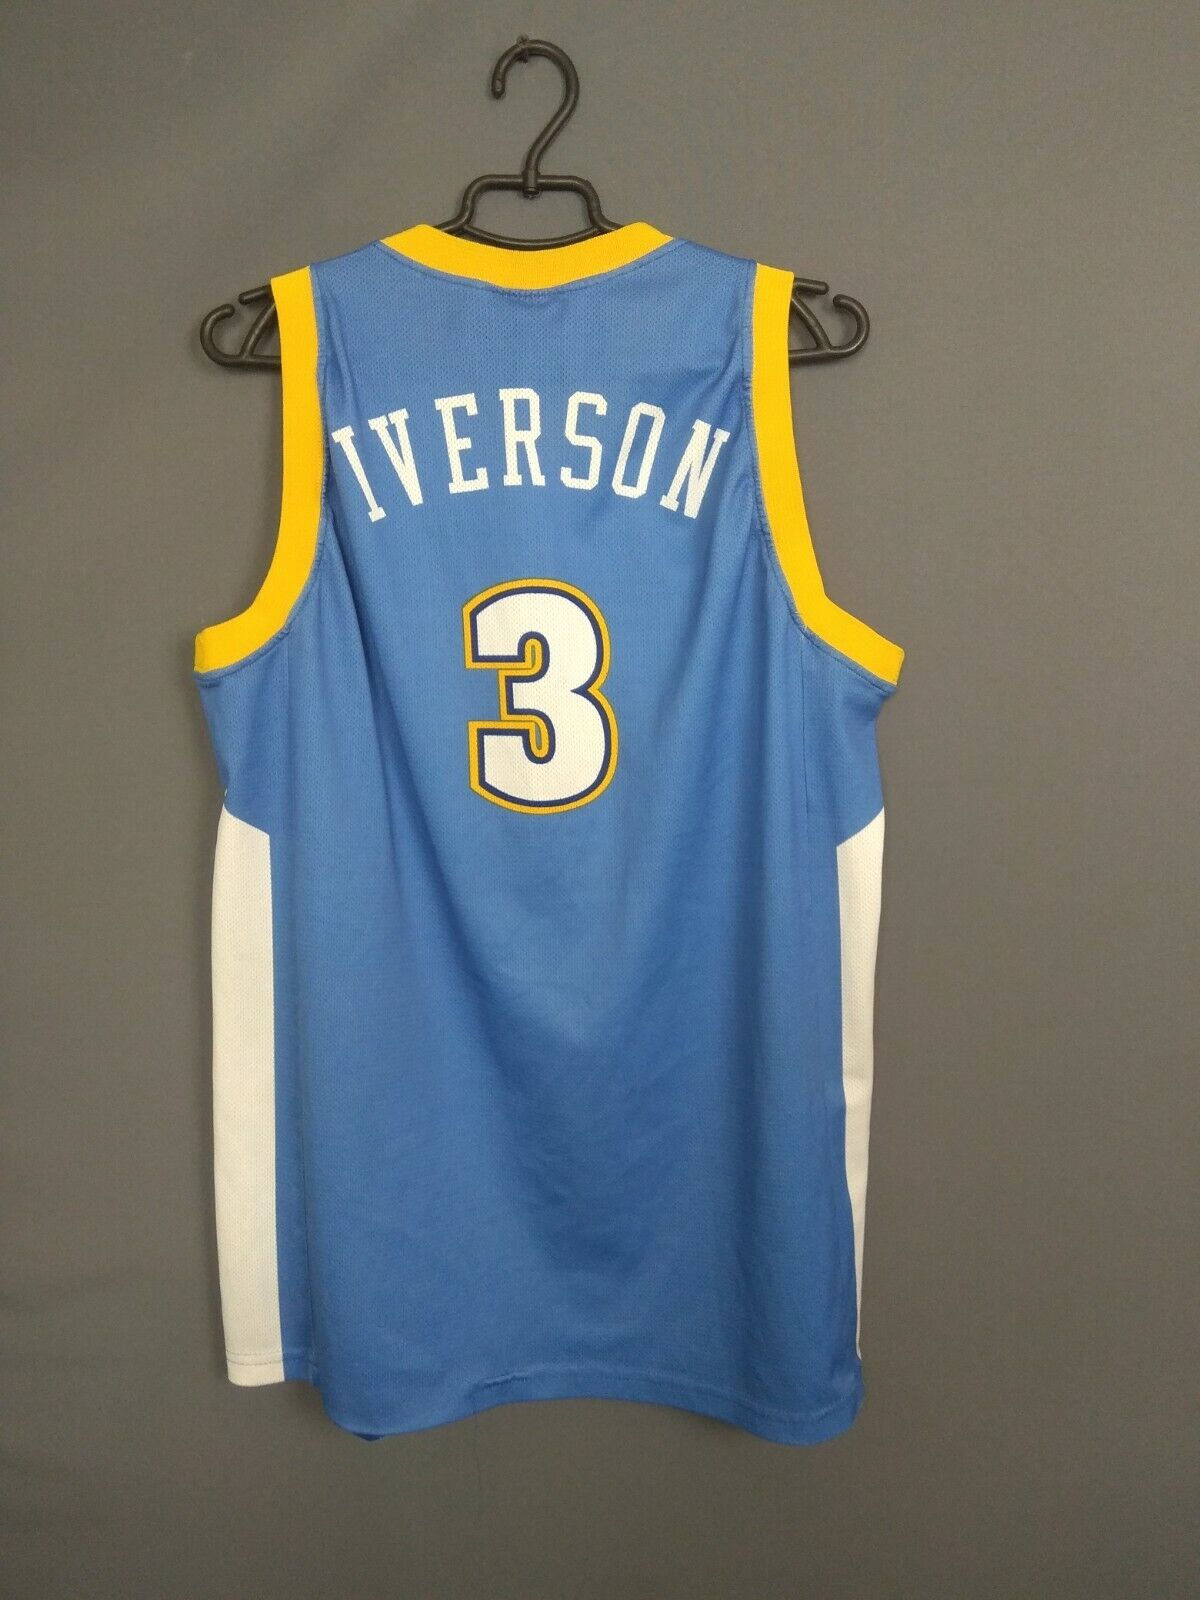 Iverson Denver Nuggets Jersey Basketball Size XL Vintage Retro Champion ig93 Nowy nowy